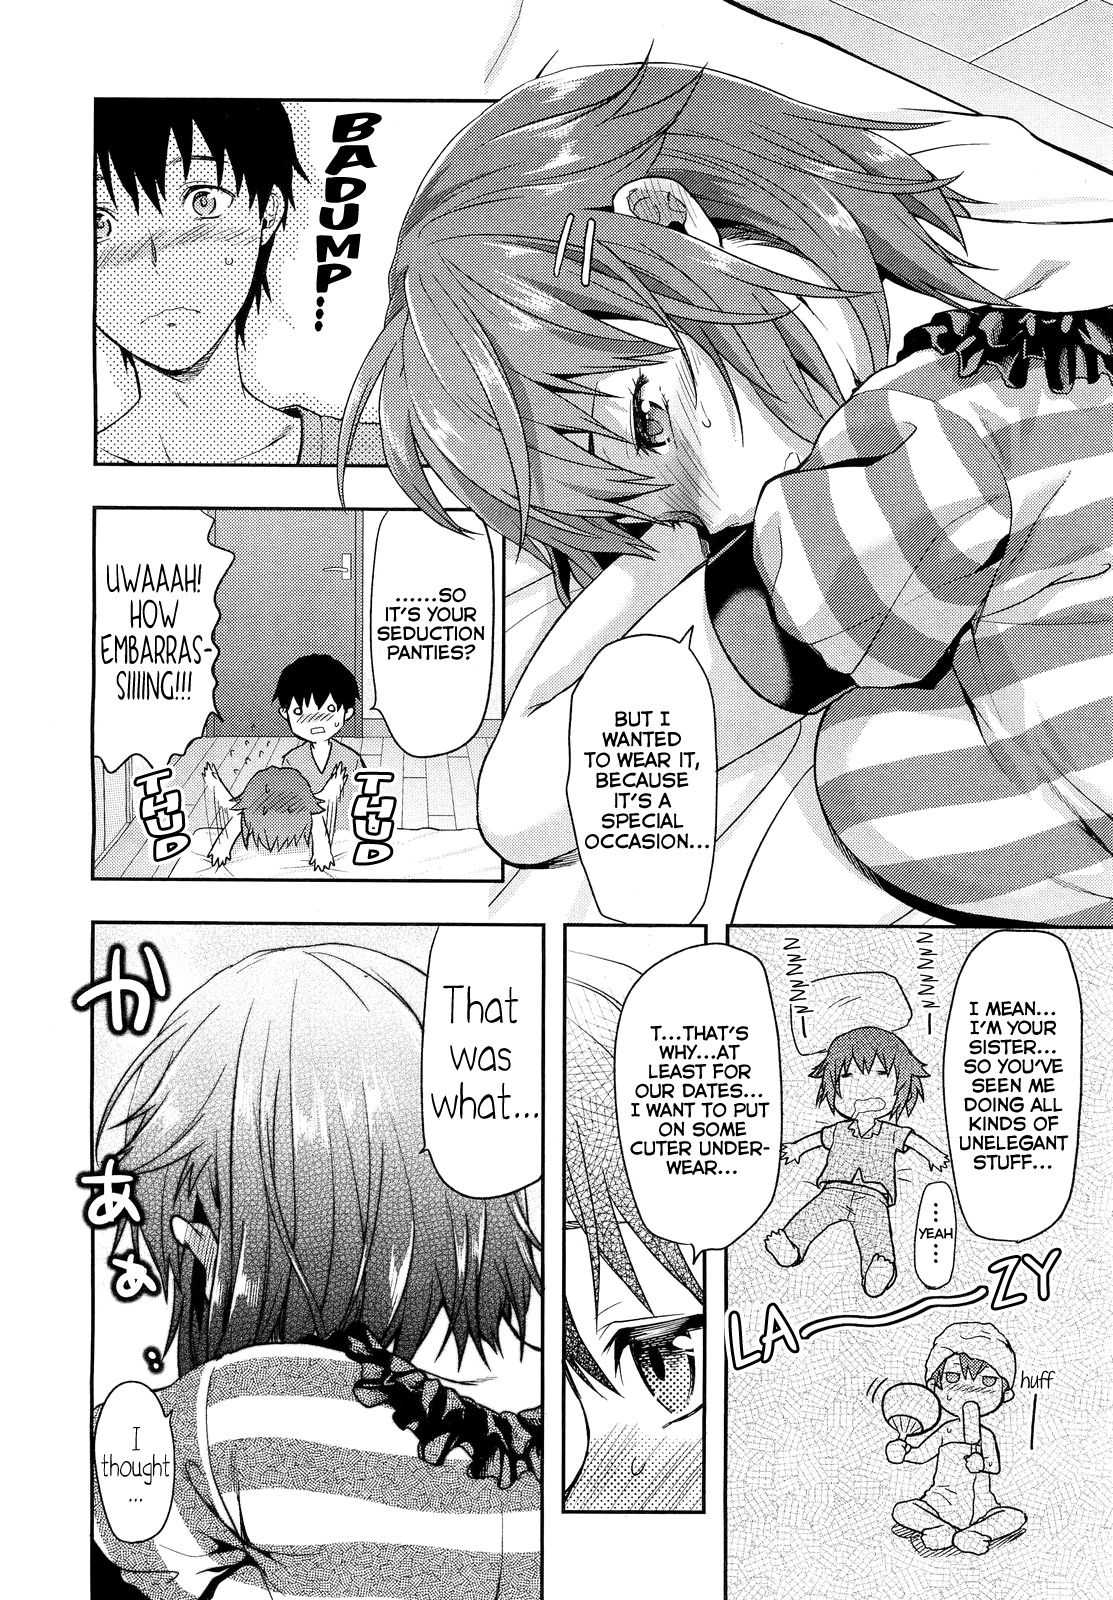 Reading Chubby Sister Original Hentai By Yuzuki N Dash 1 Chubby Sister 1 And 2 Page 22